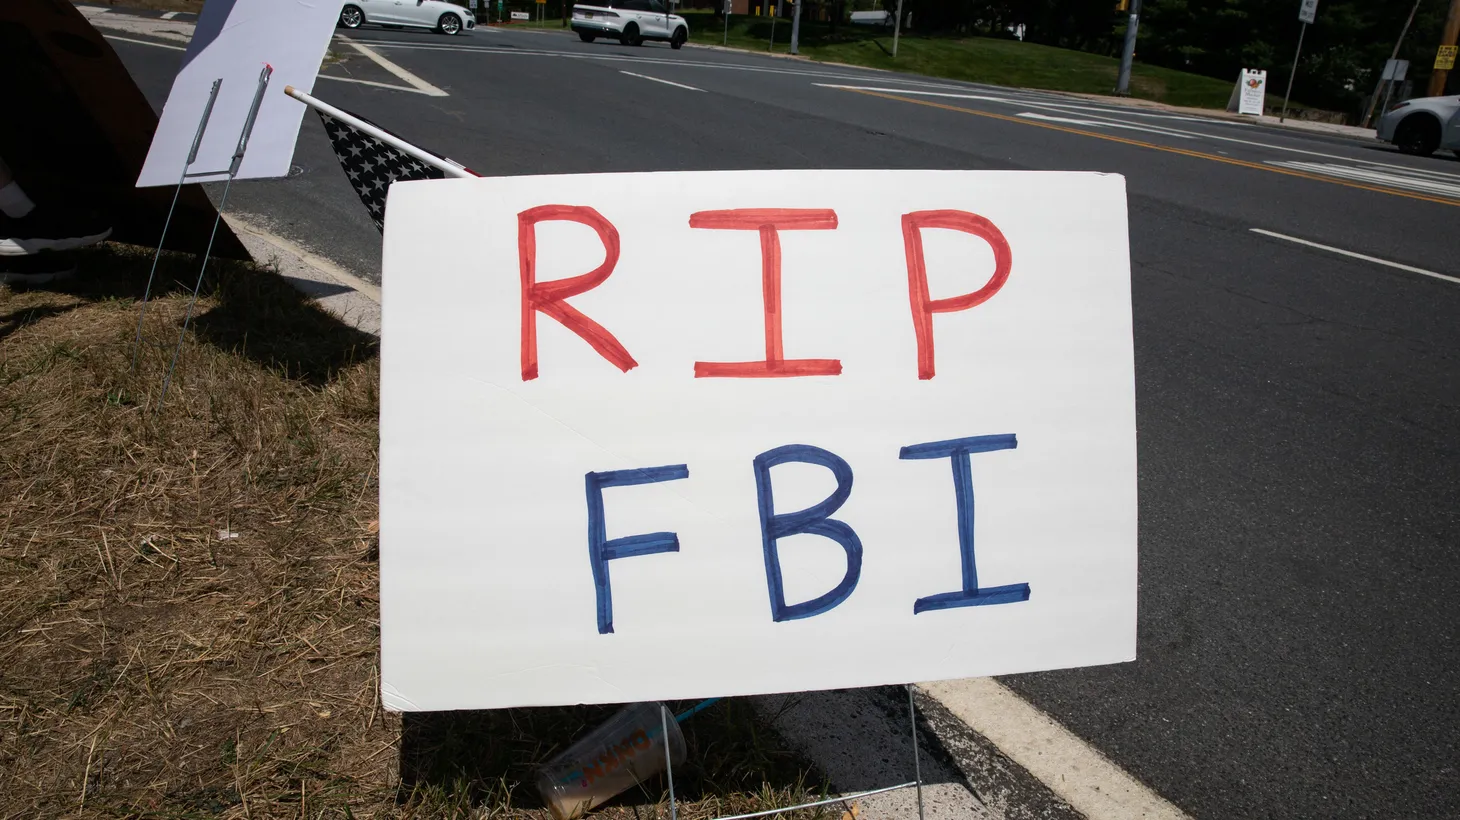 A sign says “RIP FBI” at a rally among Trump supporters near the Trump National Golf Club in Bedminster, New Jersey, August 14, 2022. This comes following the FBI's raid on former President Donald Trump's Mar-a-Lago home.